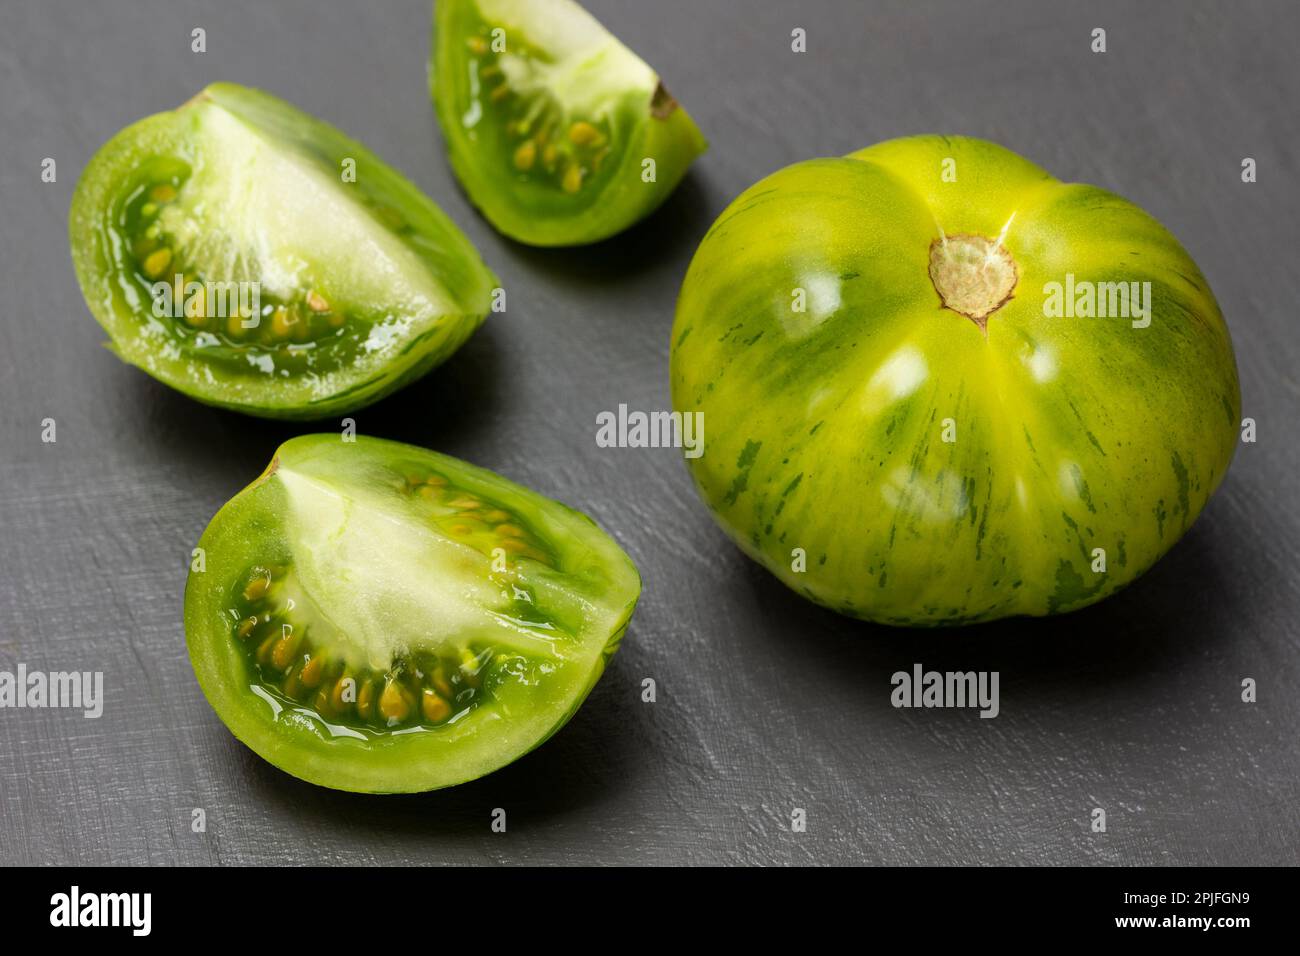 Halves of a green tomato, a whole tomato on a gray background. Top view. Stock Photo